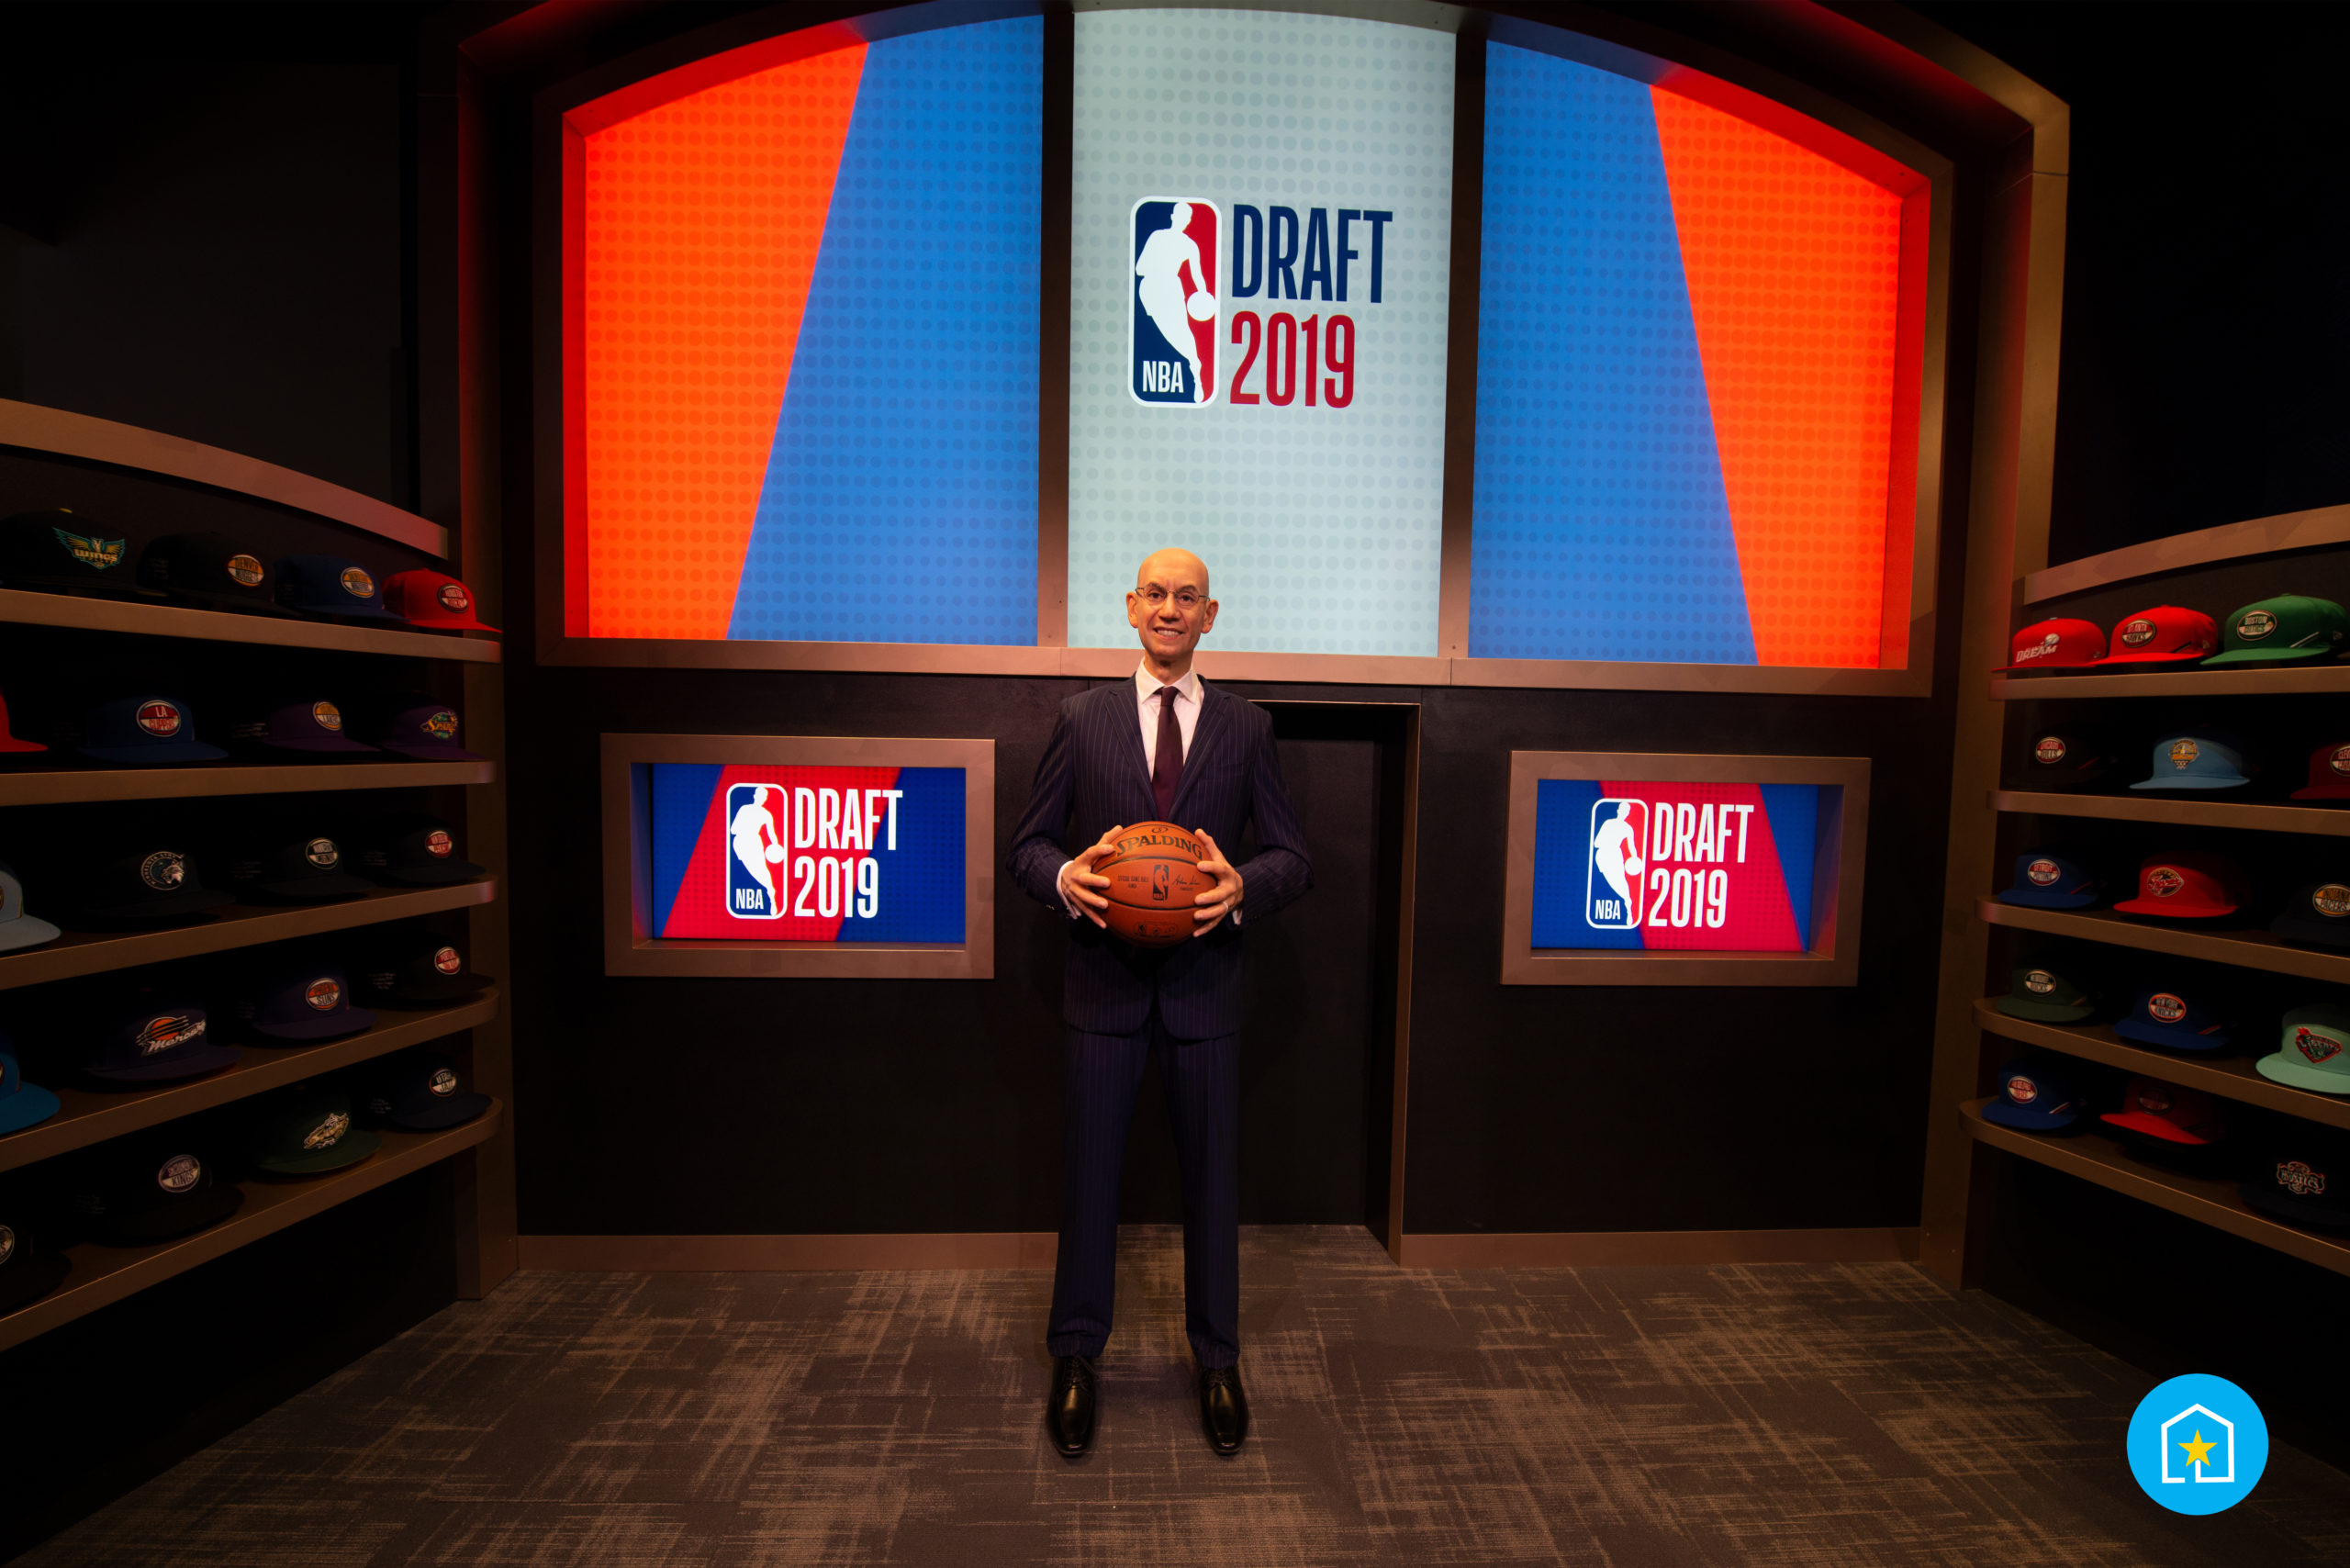 Mannequin of male NBA drafter holding a basketball for a "NBA Draft 2019" photo-op inside of the NBA Experience at Disney Springs® (Lake Buena Vista, FL).